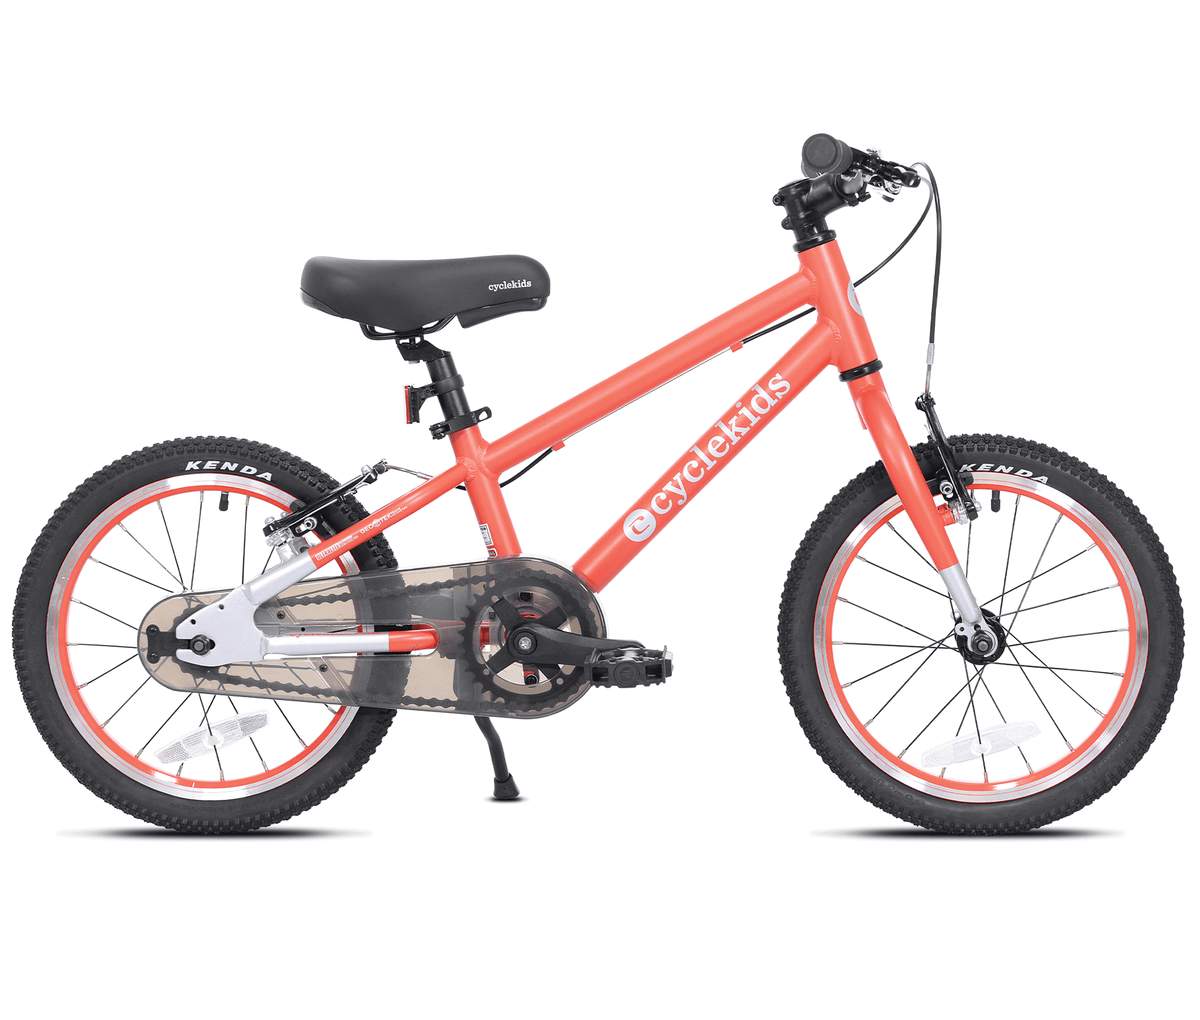 16" CYCLE Kids™ | Kids Bike For Ages 4 - 6